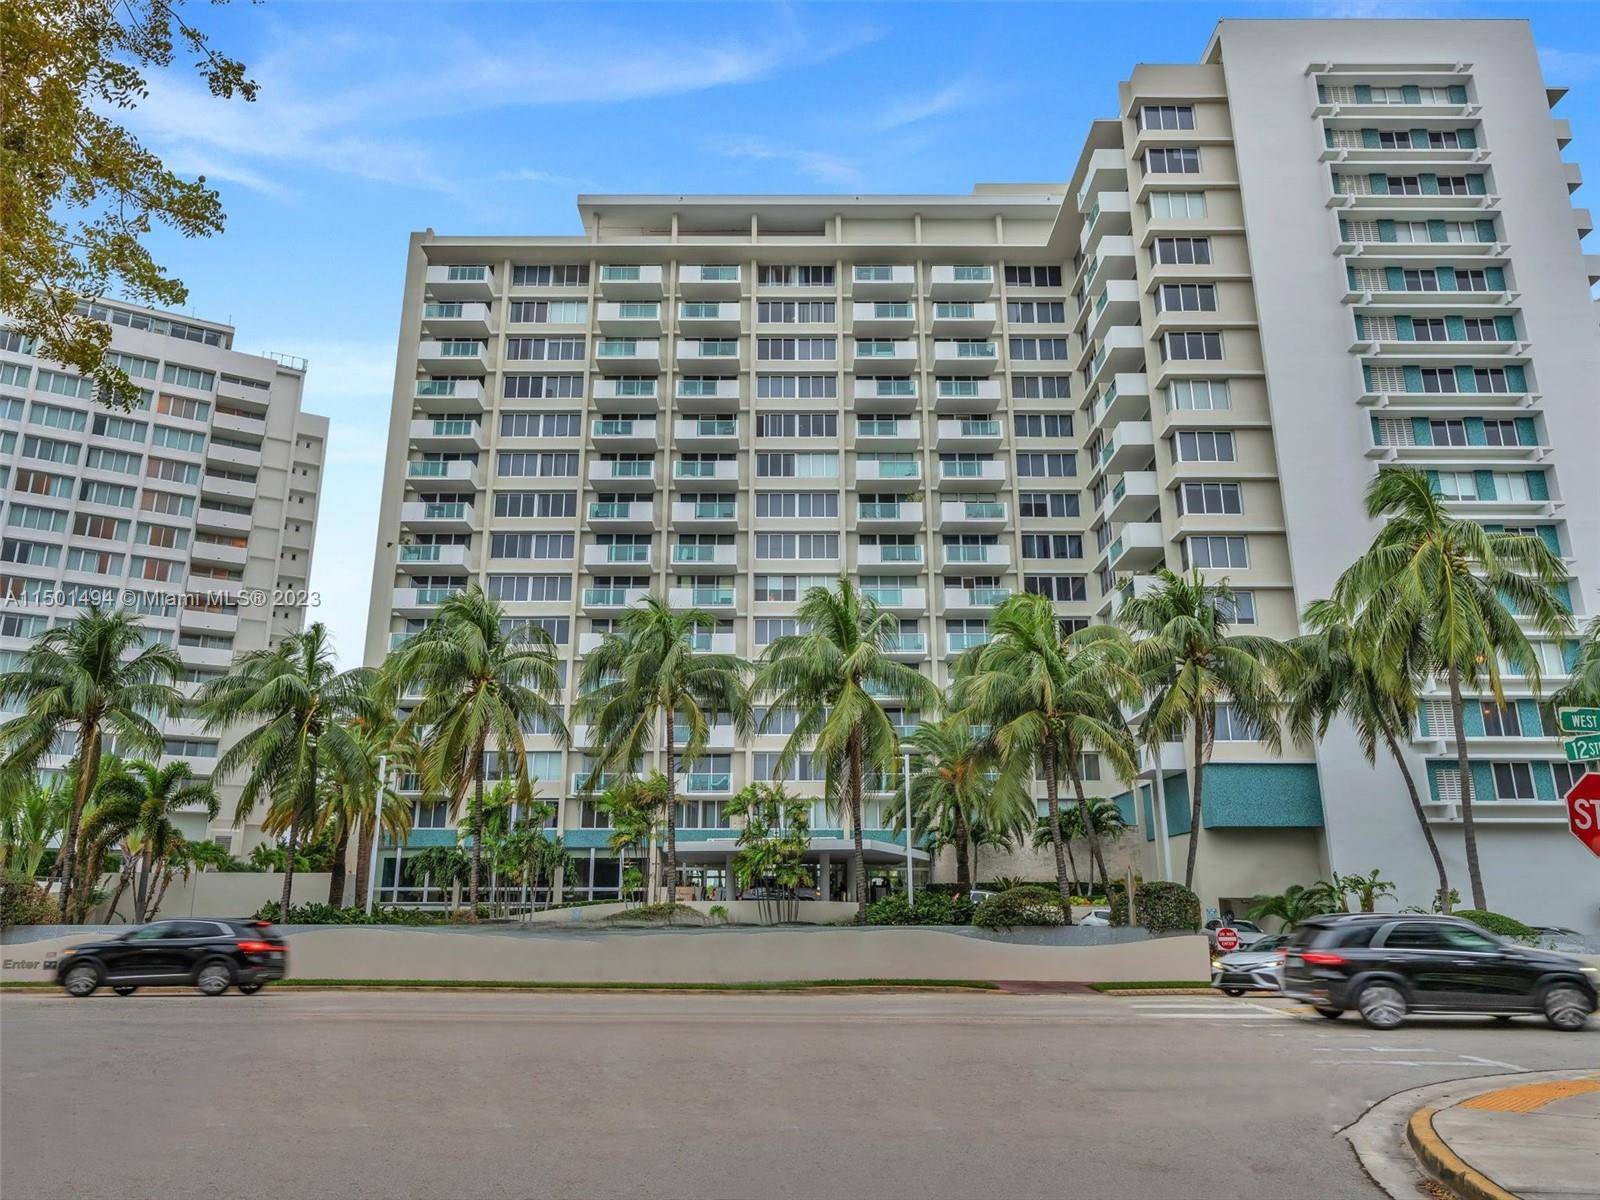 Beautiful completely remodeled apartment with open kitchen, modern bath, tile floors, custom lighting closets, large balcony with great bay and city views from the balcony.